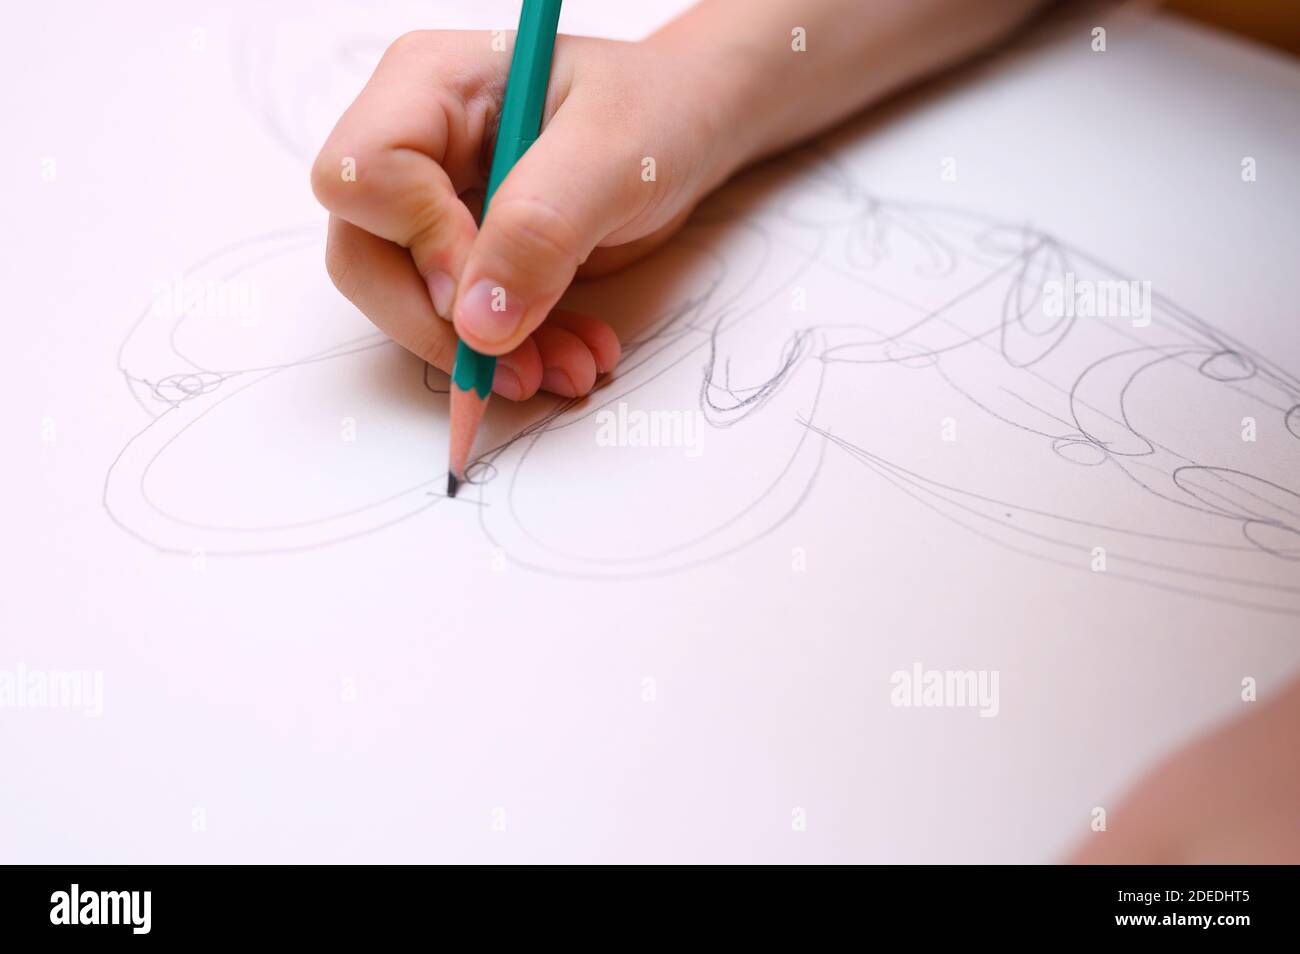 kids hobby. child hand draws sketch with a pencil on white paper Stock Photo